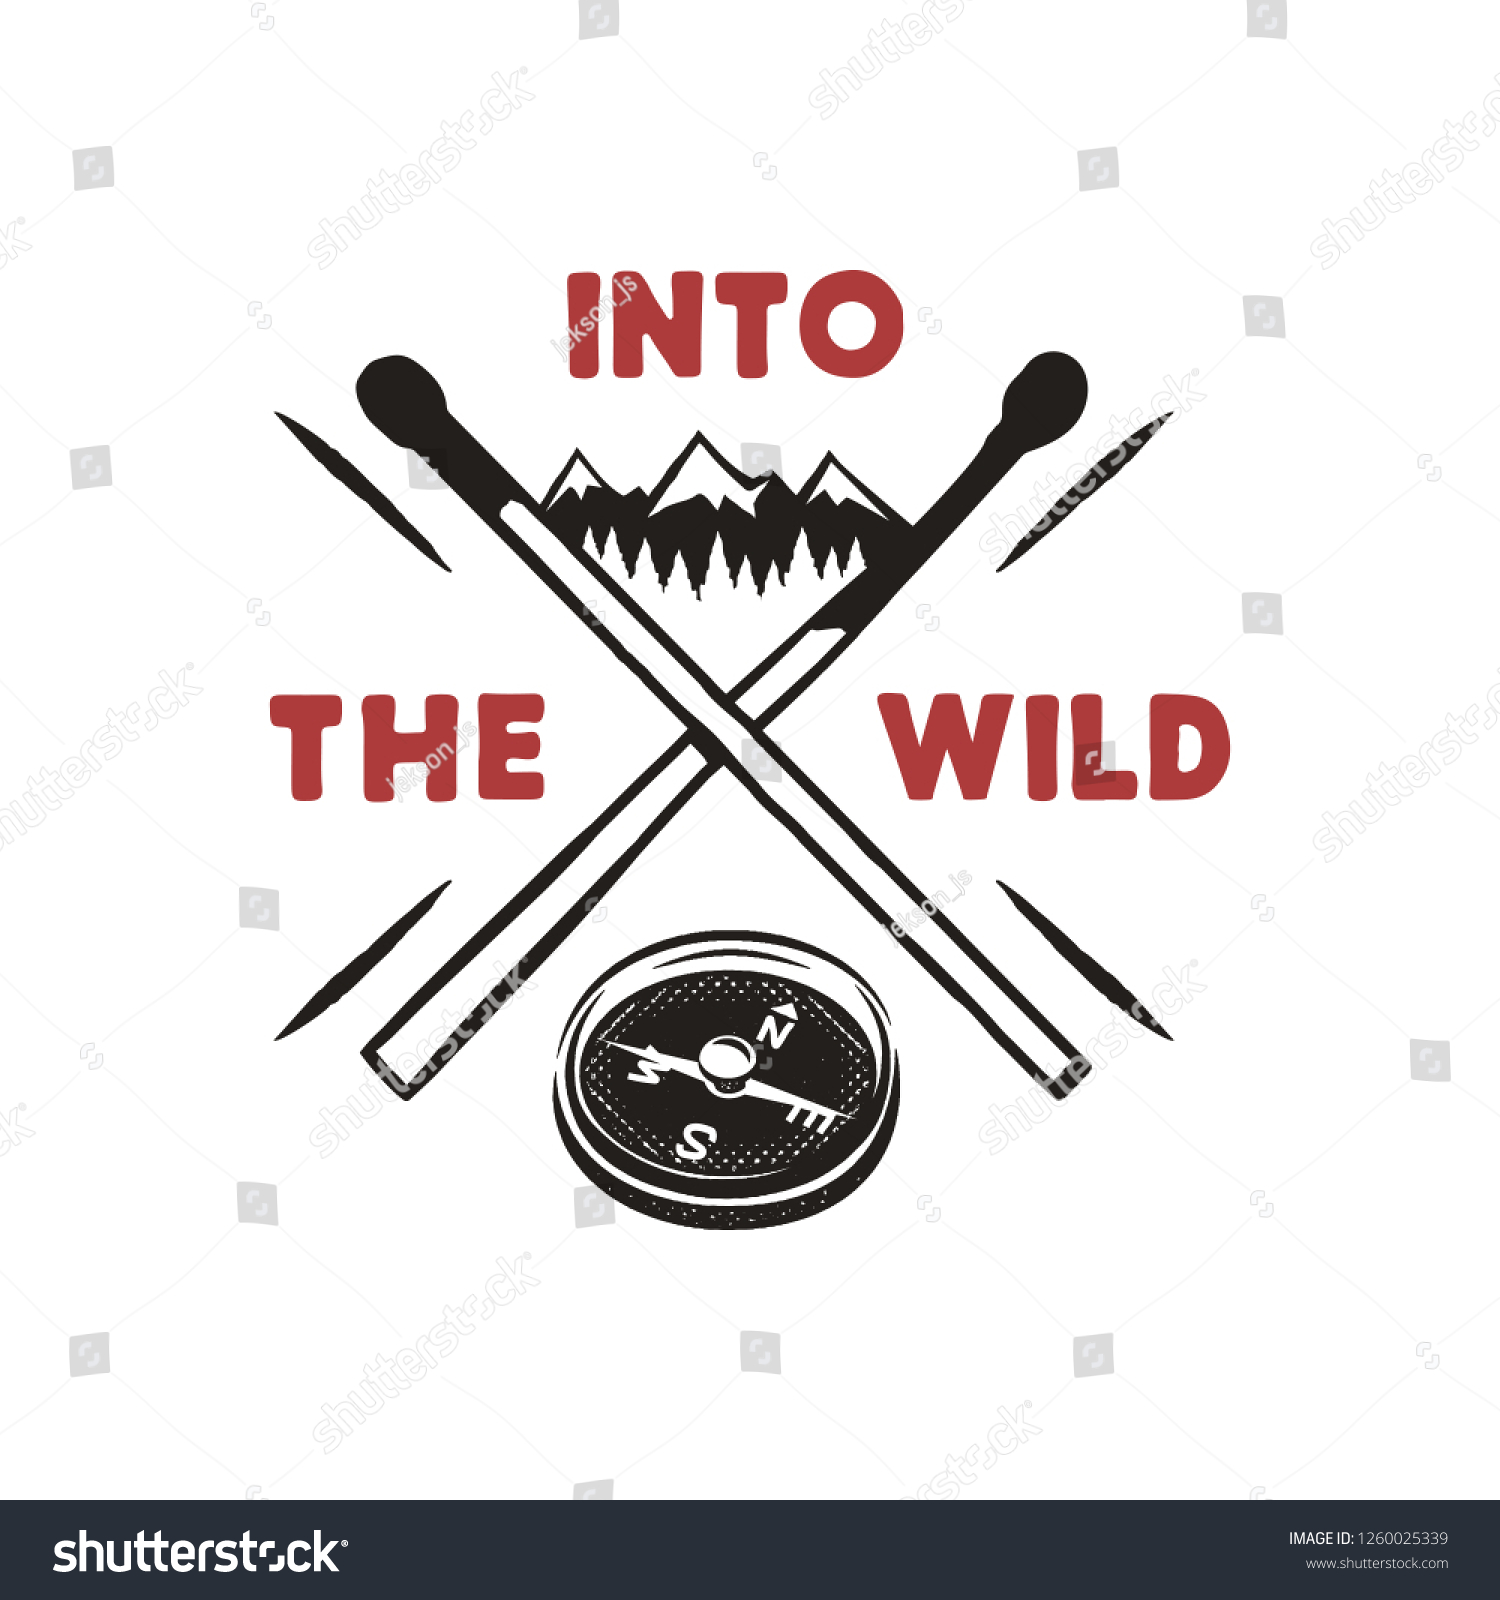 Into The Wild Outdoors Adventure Badge With Royalty Free Stock Vector 1260025339